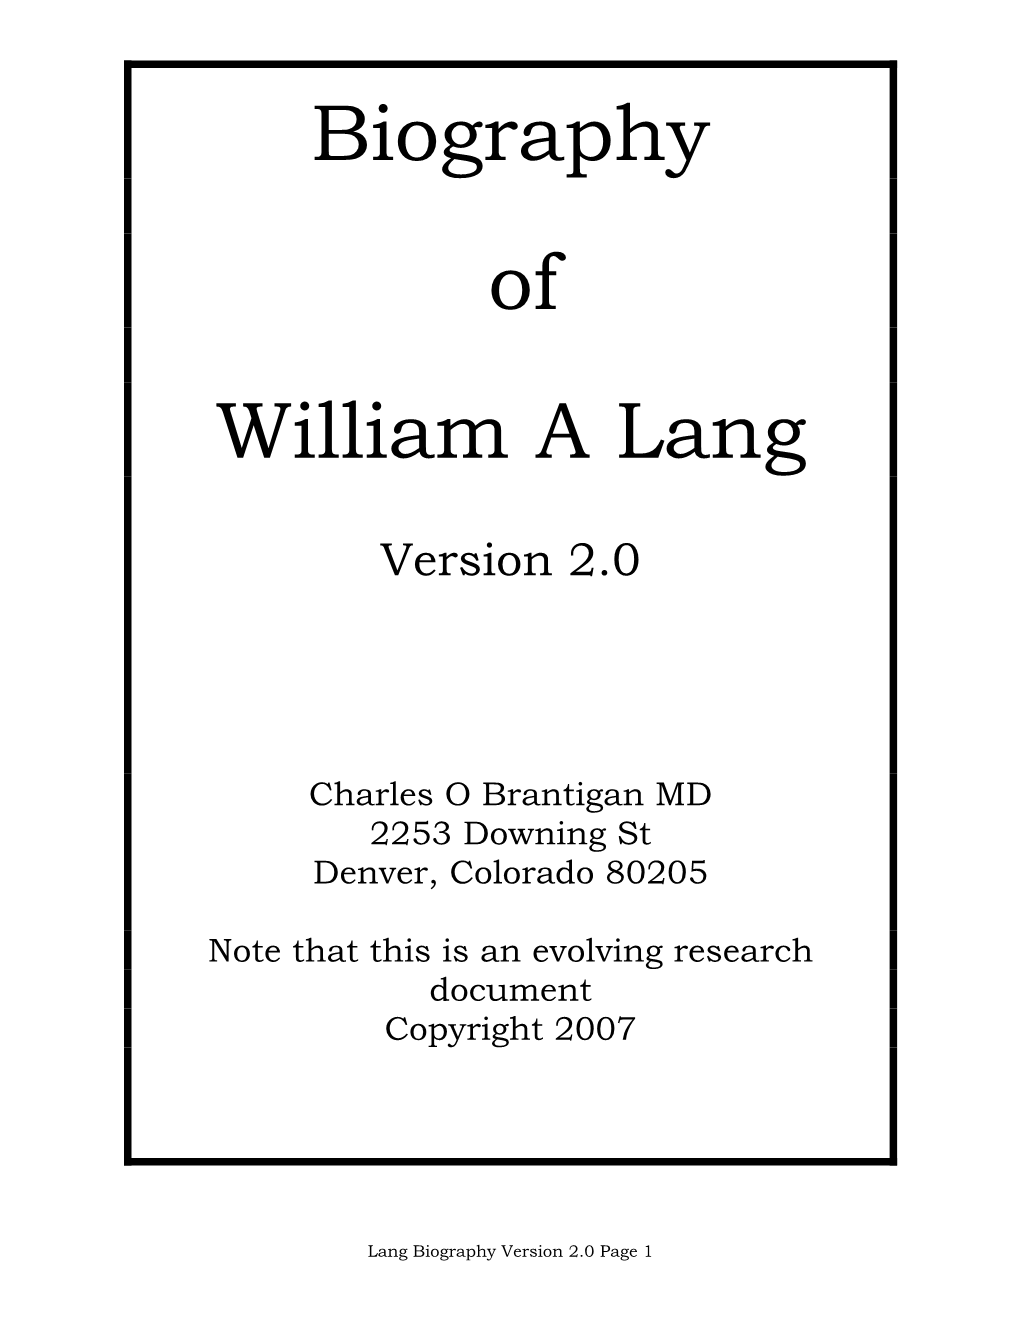 Biography of William a Lang